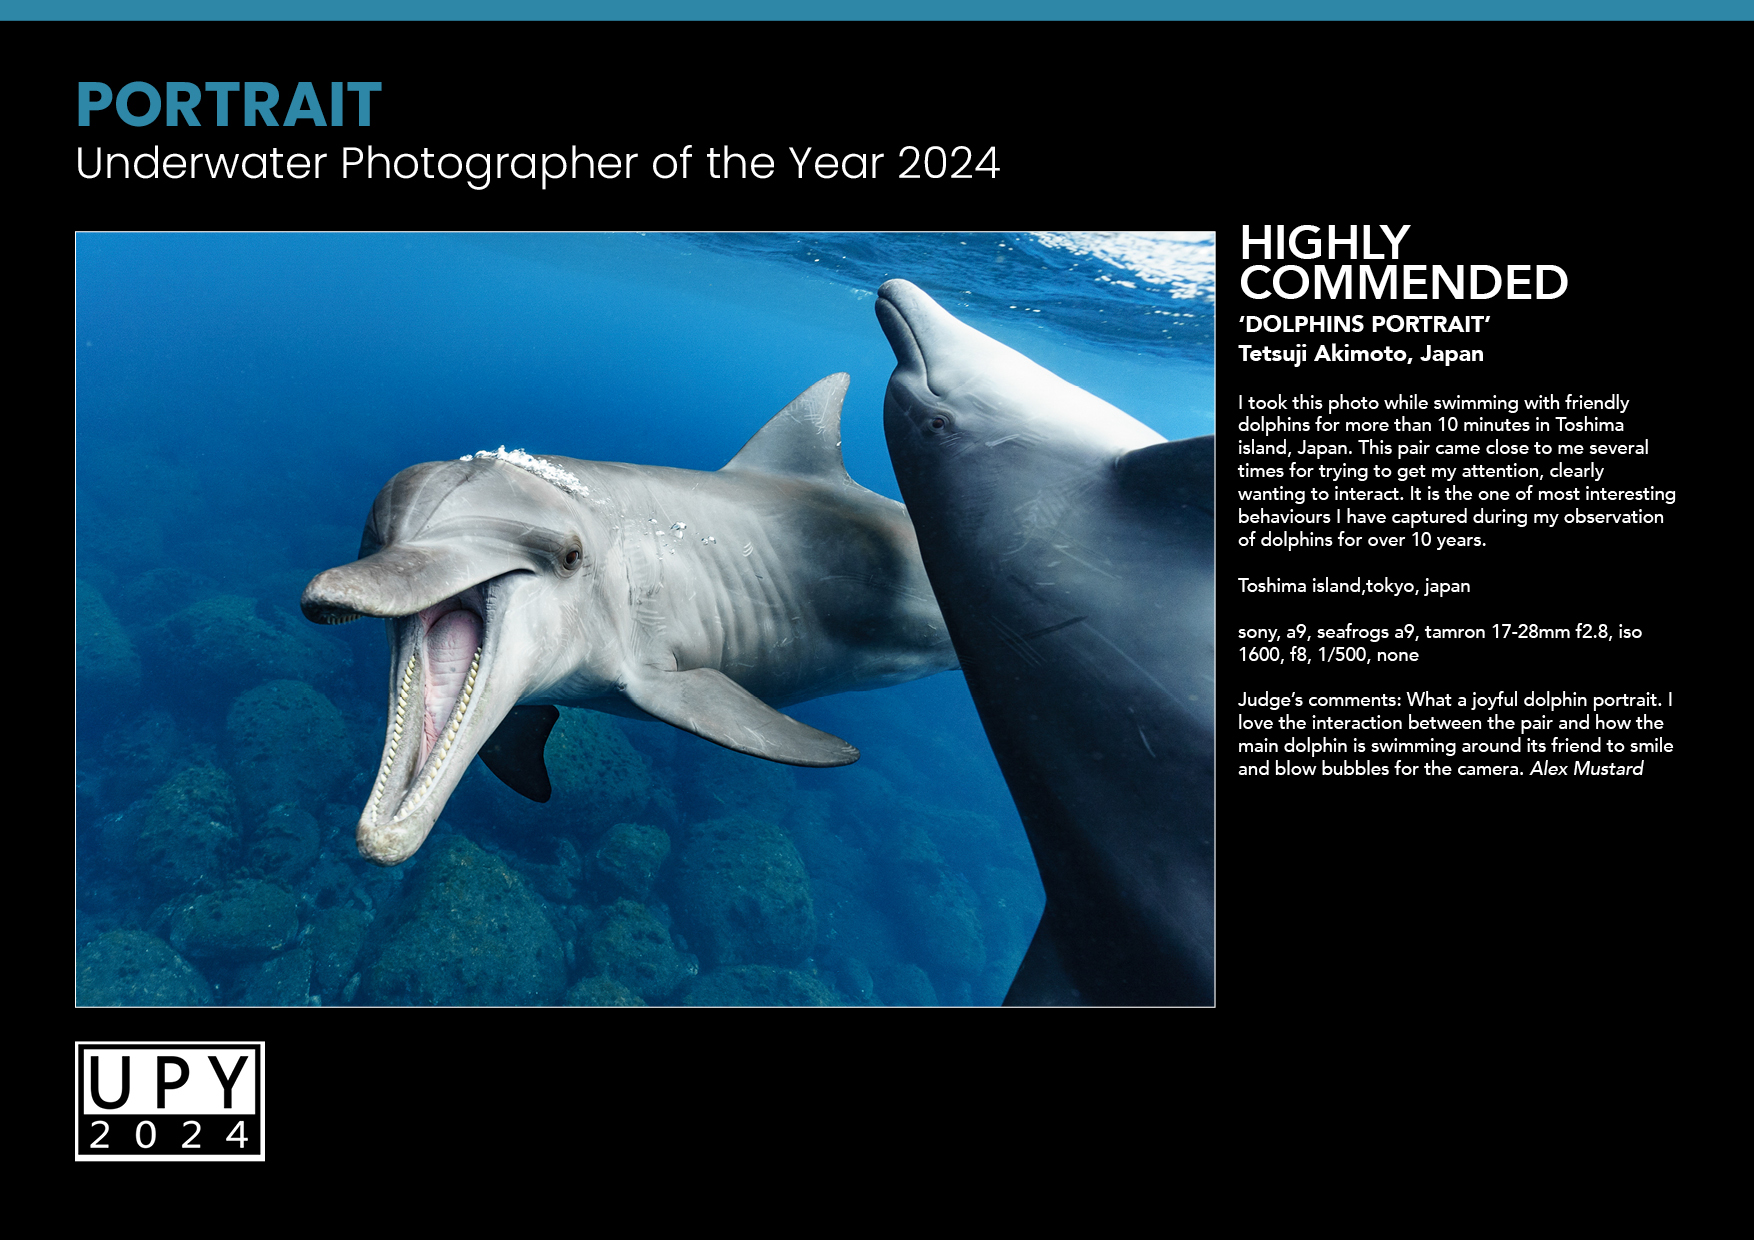 Underwater photographer of the year 2024  “Portrait” Highly Commended